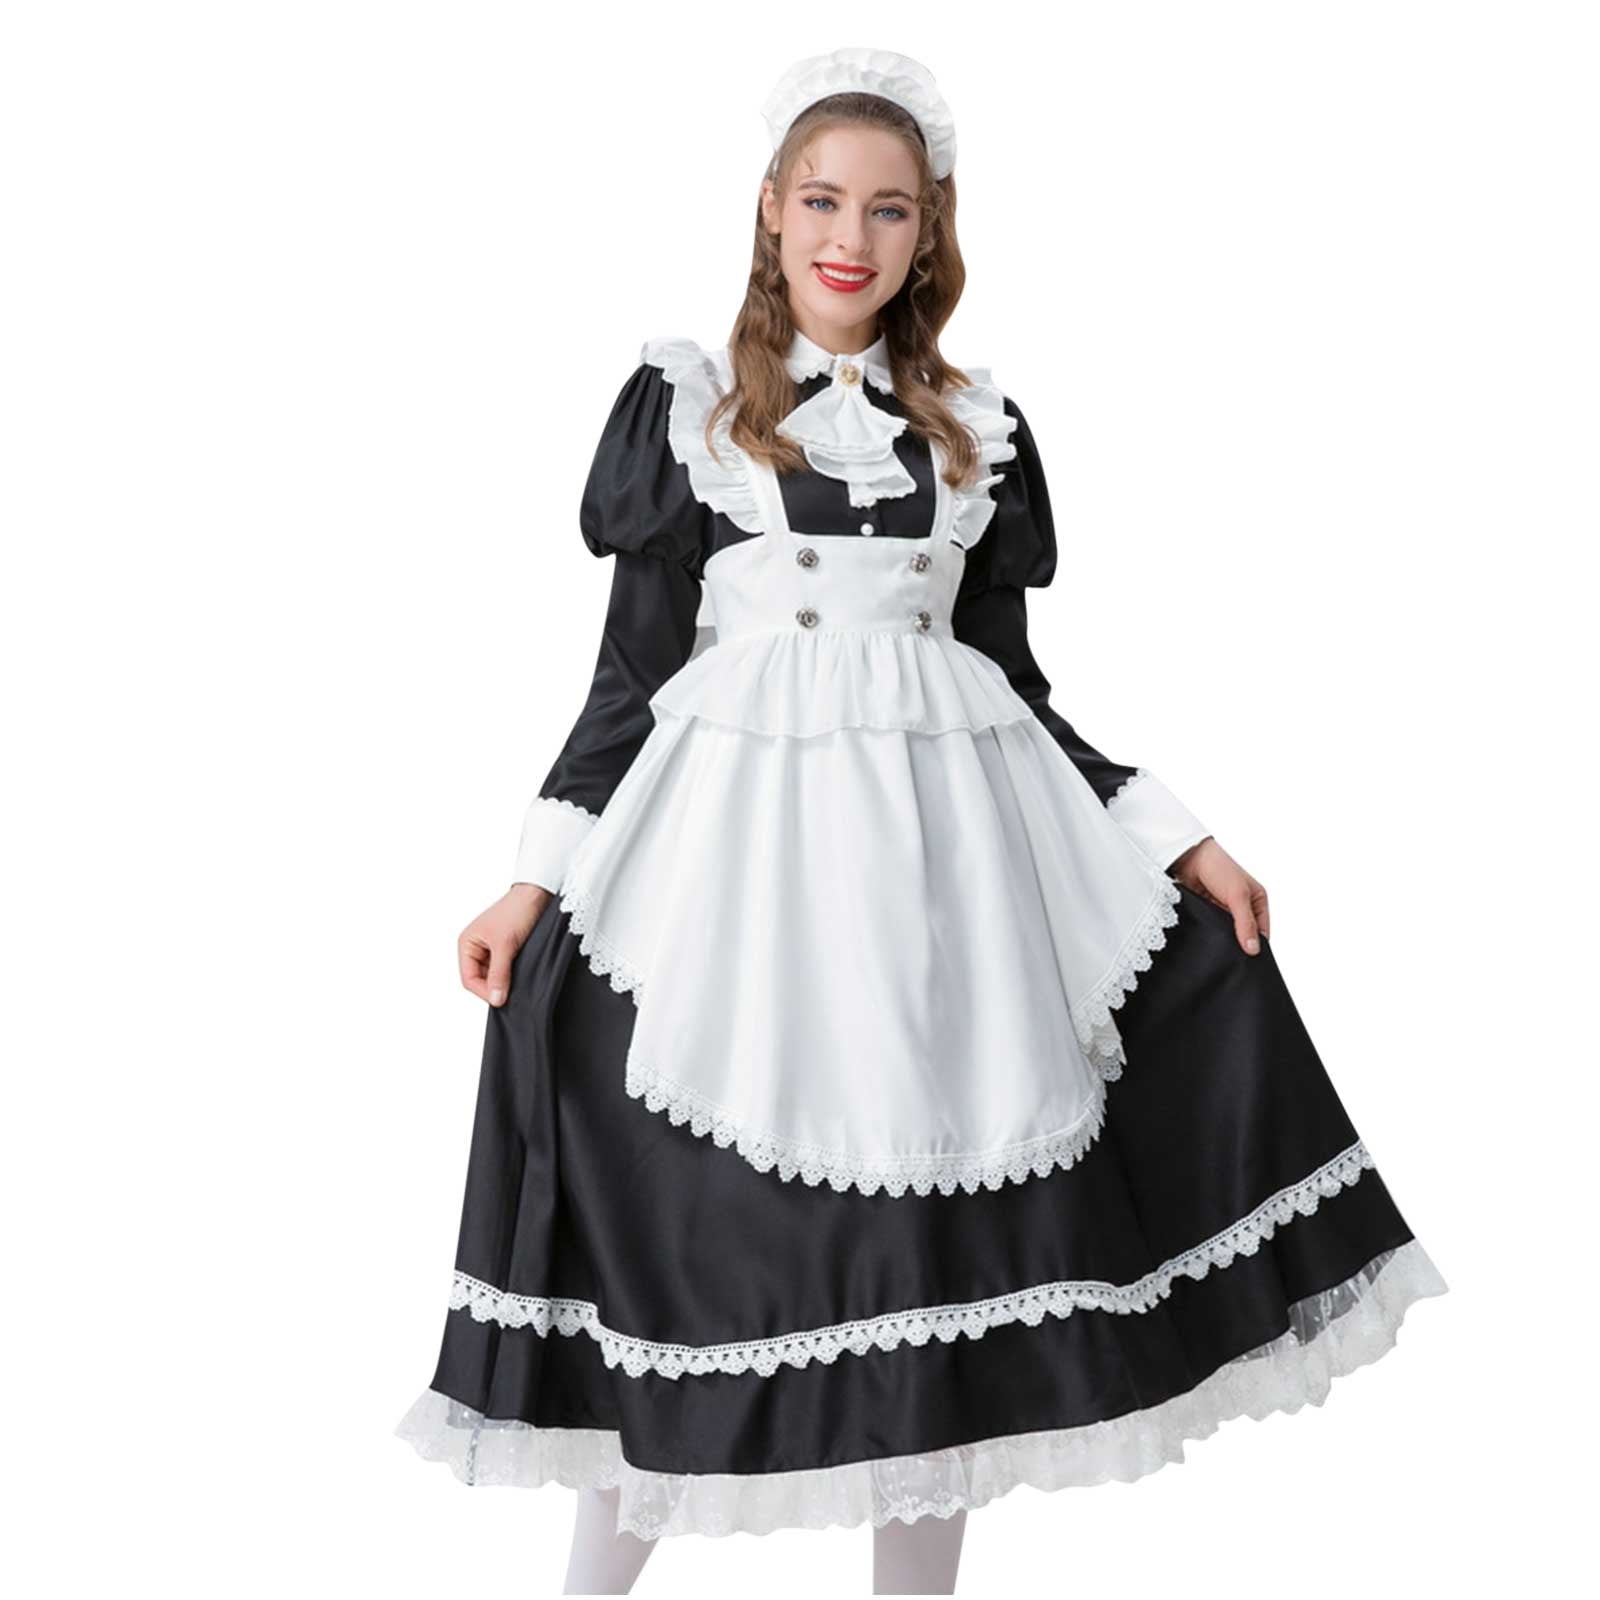 Reoriafee Oktoberfest Costumes Women Maid Outfit Cosplay Outfits Beer Girl Costume Patchwork